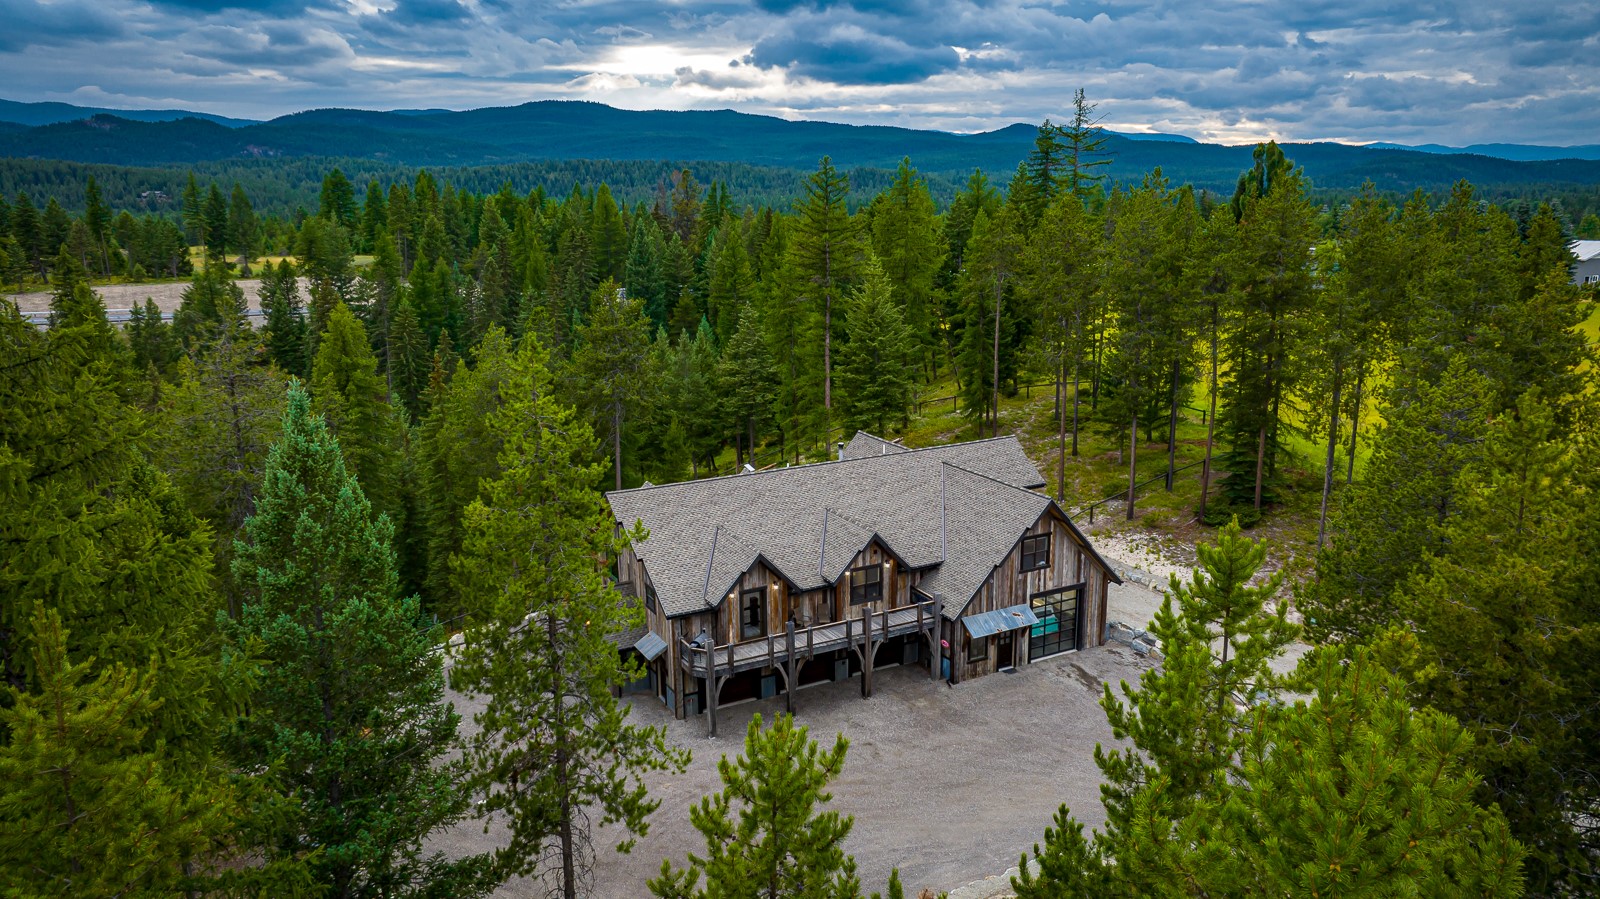 Live your Montana dream while building investment with the Grizzly Ridge Cabins! Tucked away on nearly 31 private acres just 10 minutes outside of Whitefish is a newly built 2,663 3-bedroom, 2-bathroom primary residence w/ 3,200 sf of garage/shop space below & accompanied by FIVE breathtaking cabins, each unique unto itself on this beautifully parked out wooded property. Make this a multigenerational family property for years to come or live in this scenic recreational wonderland with 5 separate potential income streams. Three of five cabins are fully complete, turnkey, 1,090 sf each, w/ 3 beds, 1.5 baths & the remaining two are under construction, nearing completion & 1,200 sf each, w/ 3 beds, 2 baths & each cabin complete with AC. Within minutes of N Spencer Mountain Trailhead, Spencer Lake & under 10 minutes to Downtown Whitefish, Whitefish Lake & Whitefish Lake Golf Course, options for outdoor play are endless! Call Sean 406-253-3010 or your real estate professional for more info.